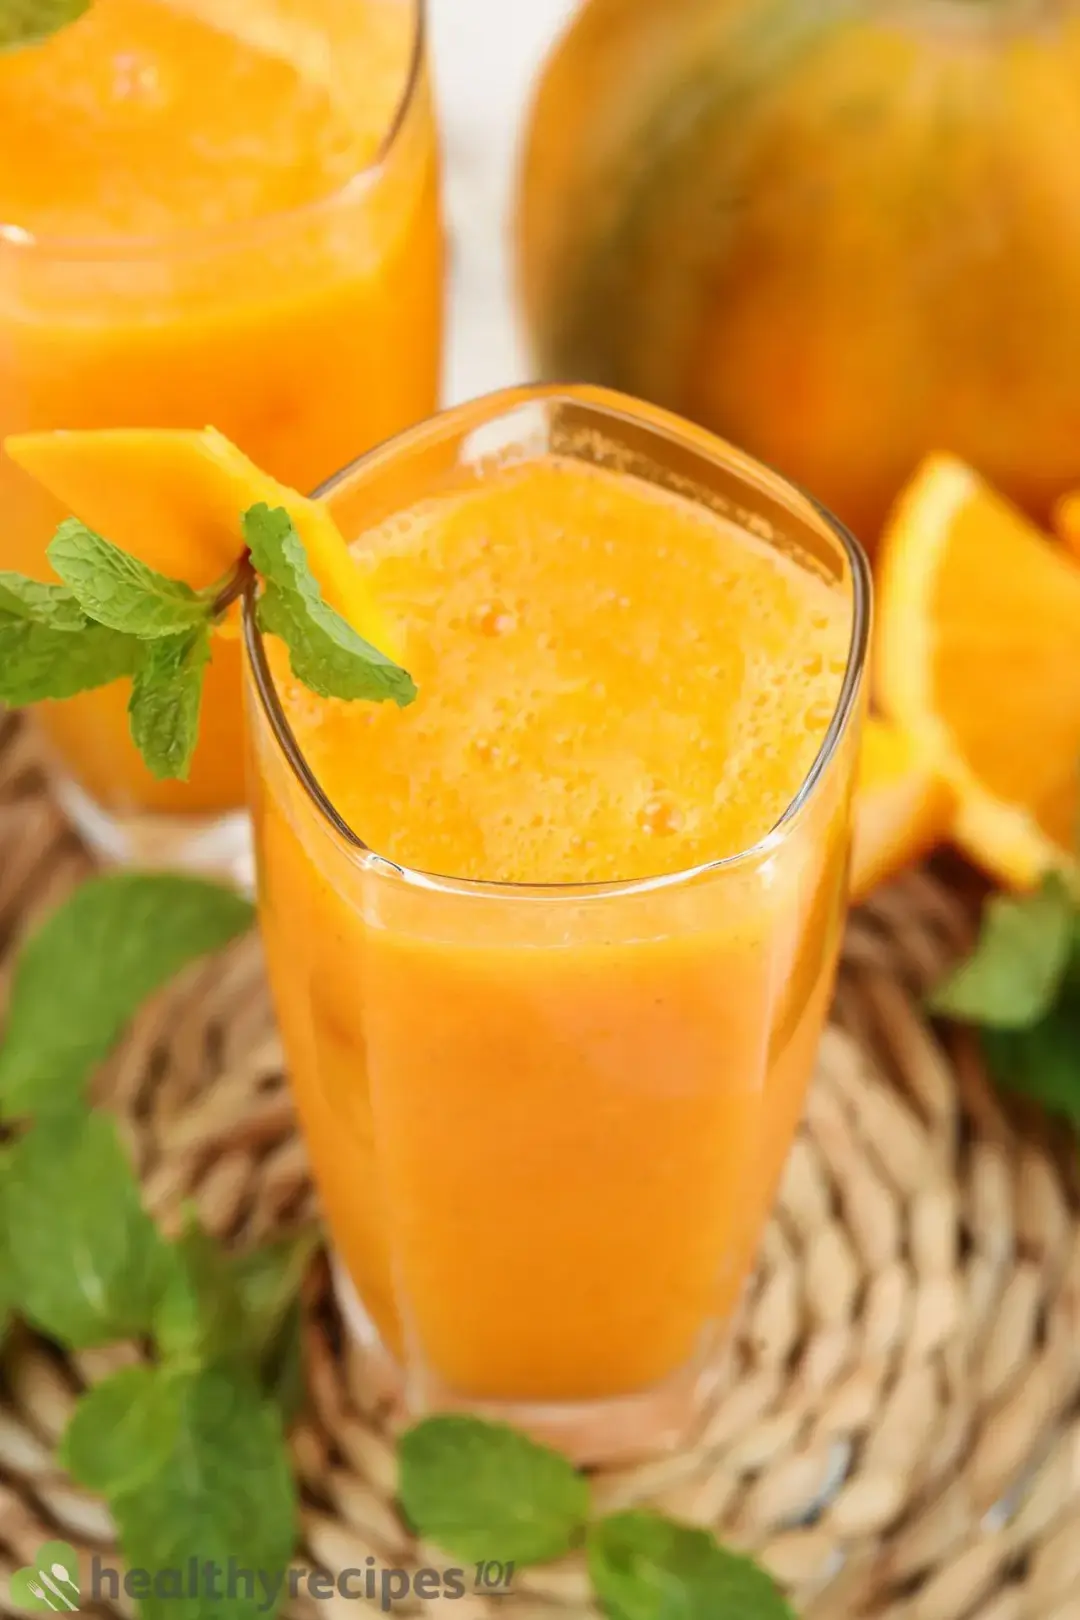 Two glasses of papaya juice, next to some mint leaves and orange wedges